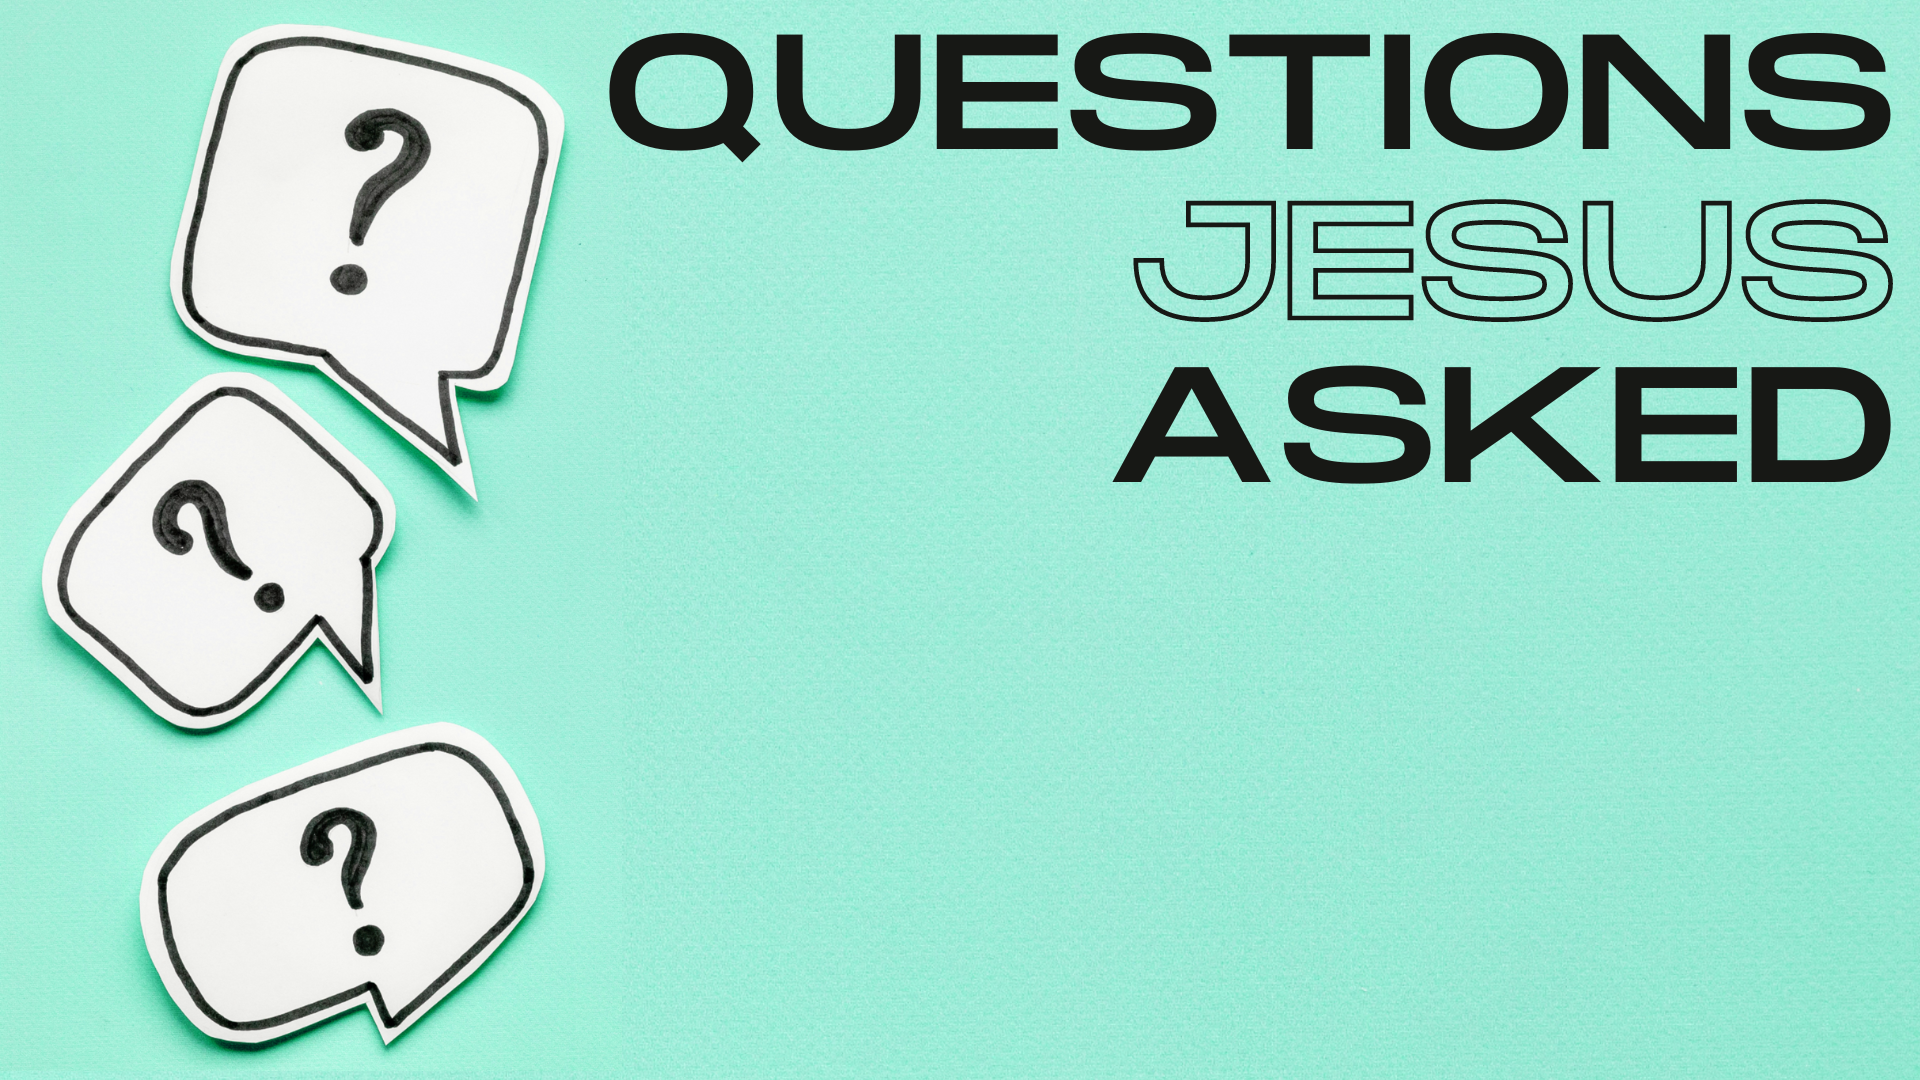 Questions Jesus Asked - MAIN